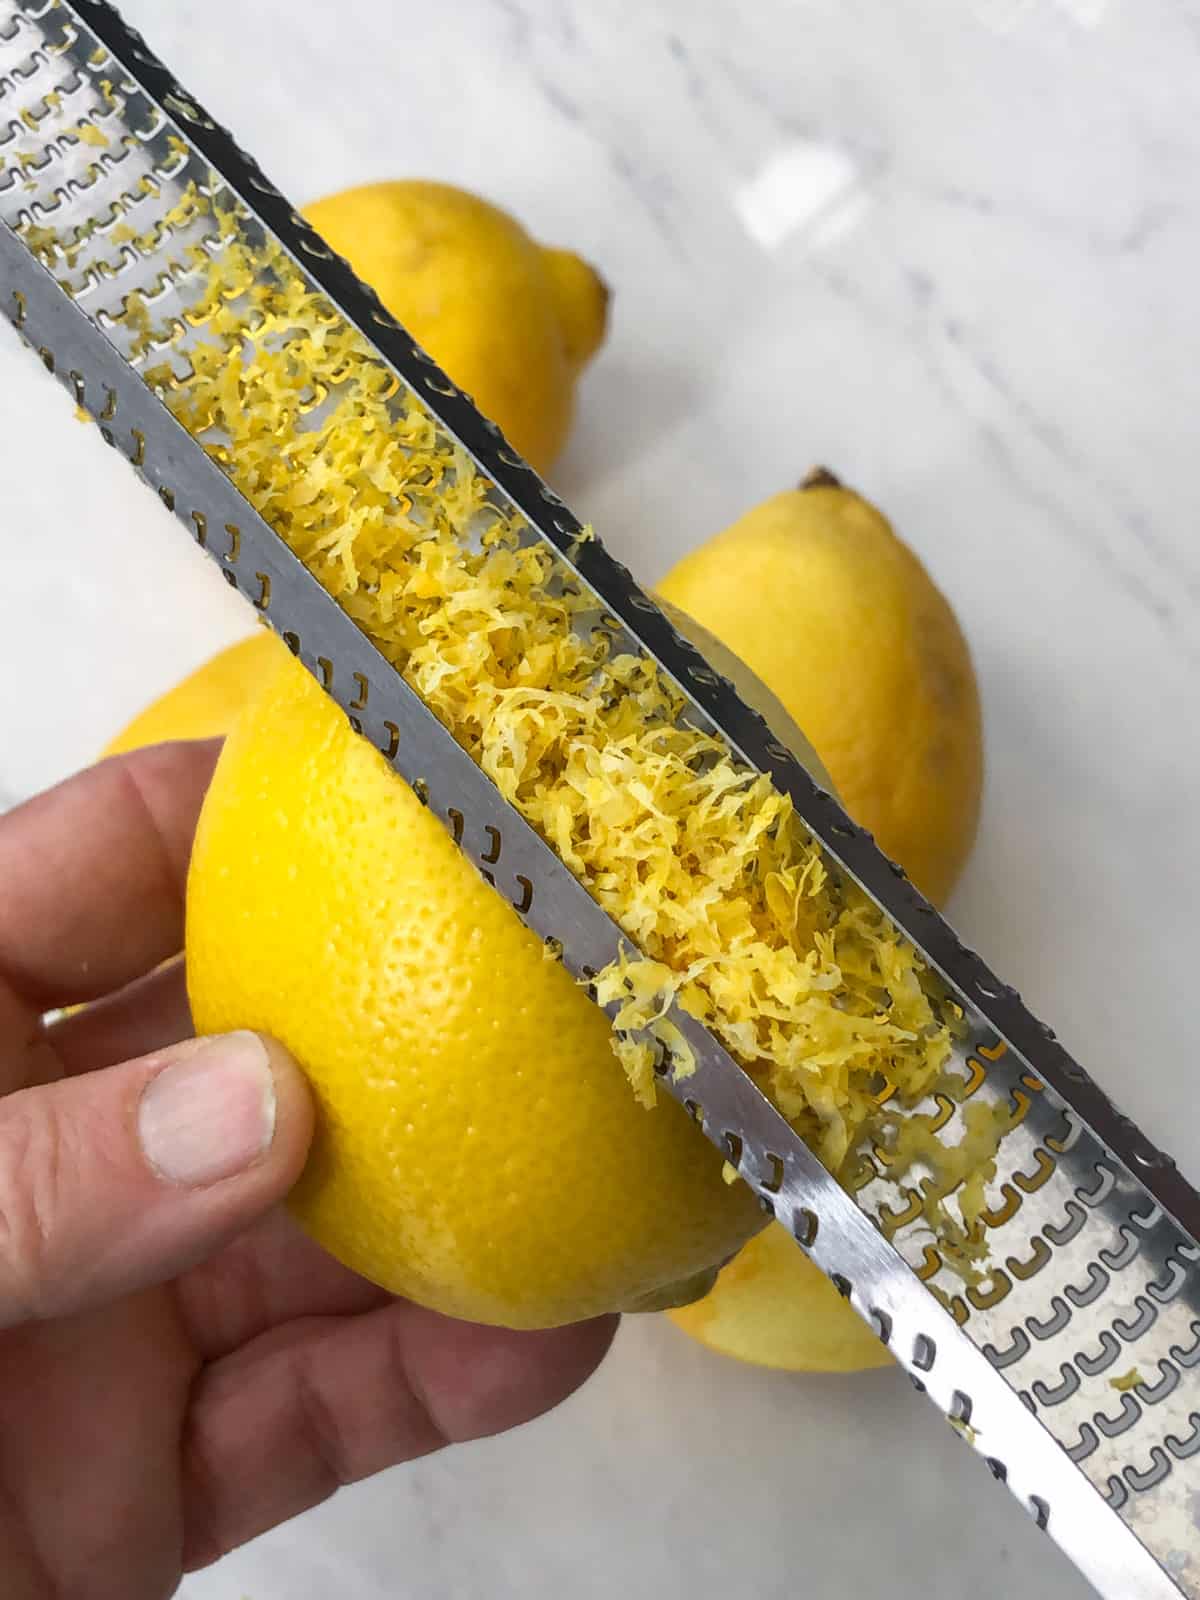 Lemon being zested on microplane.